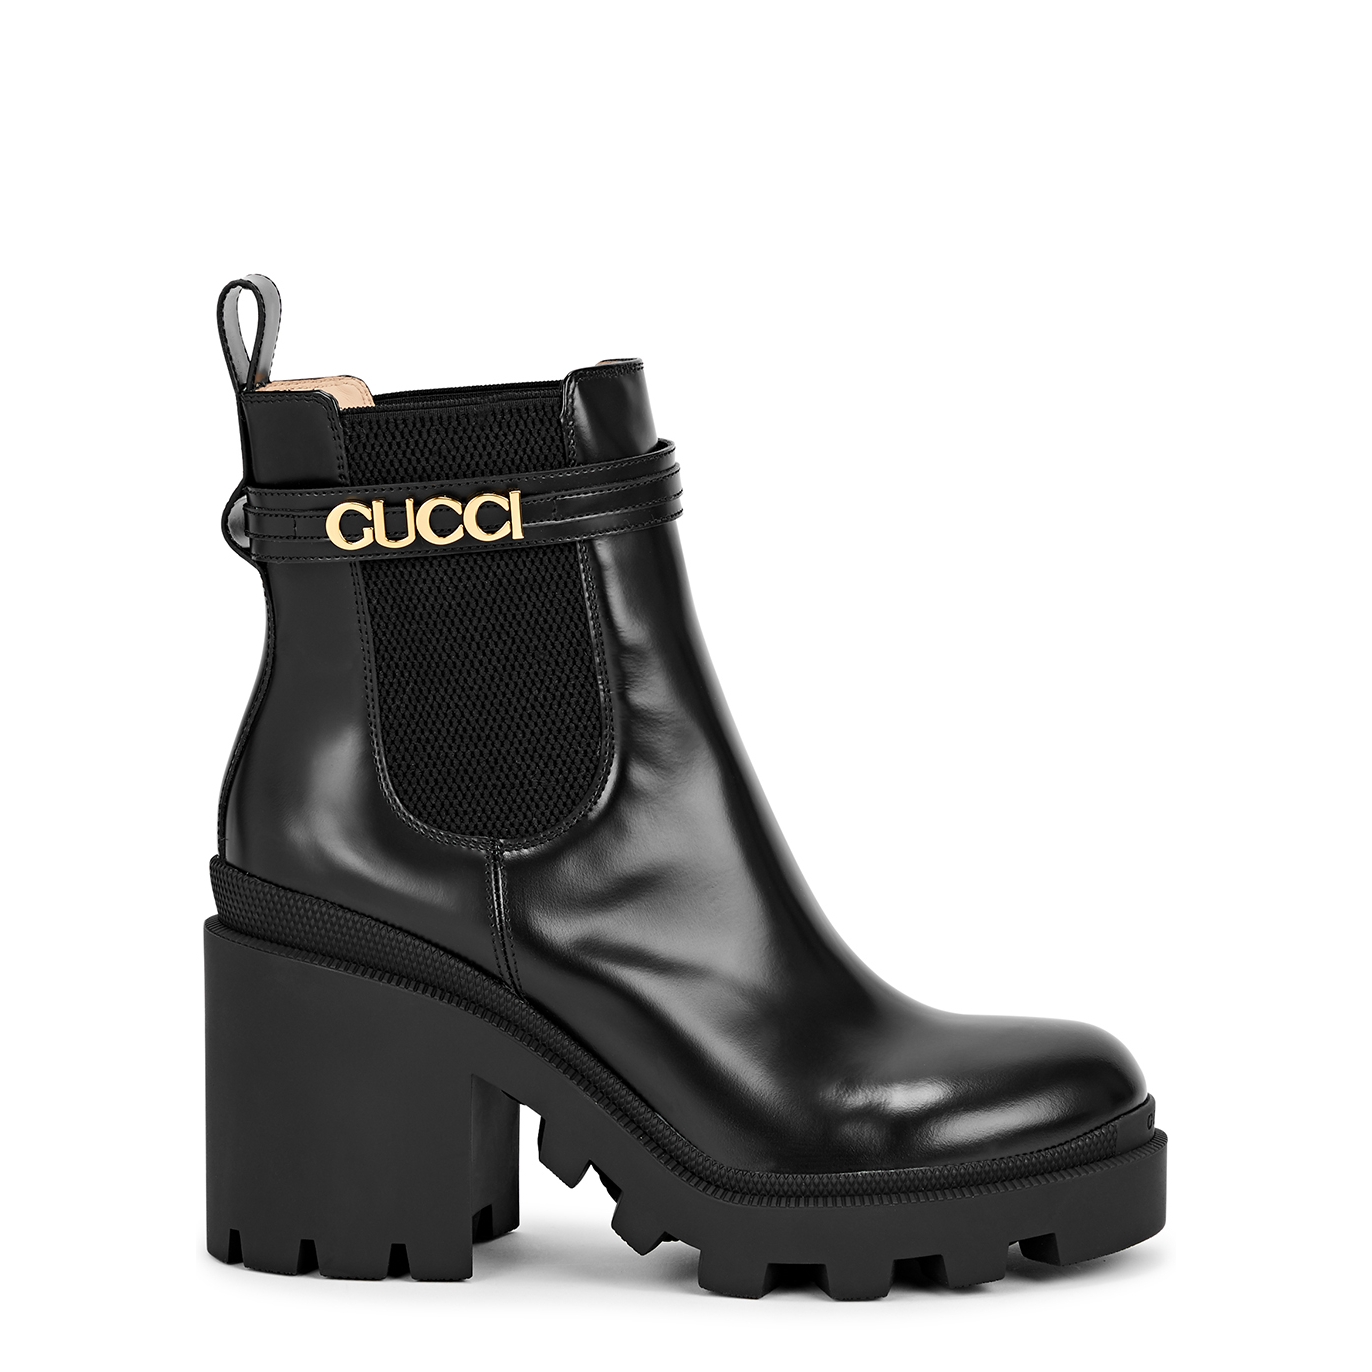 GUCCI 90 LOGO LEATHER CHELSEA BOOTS